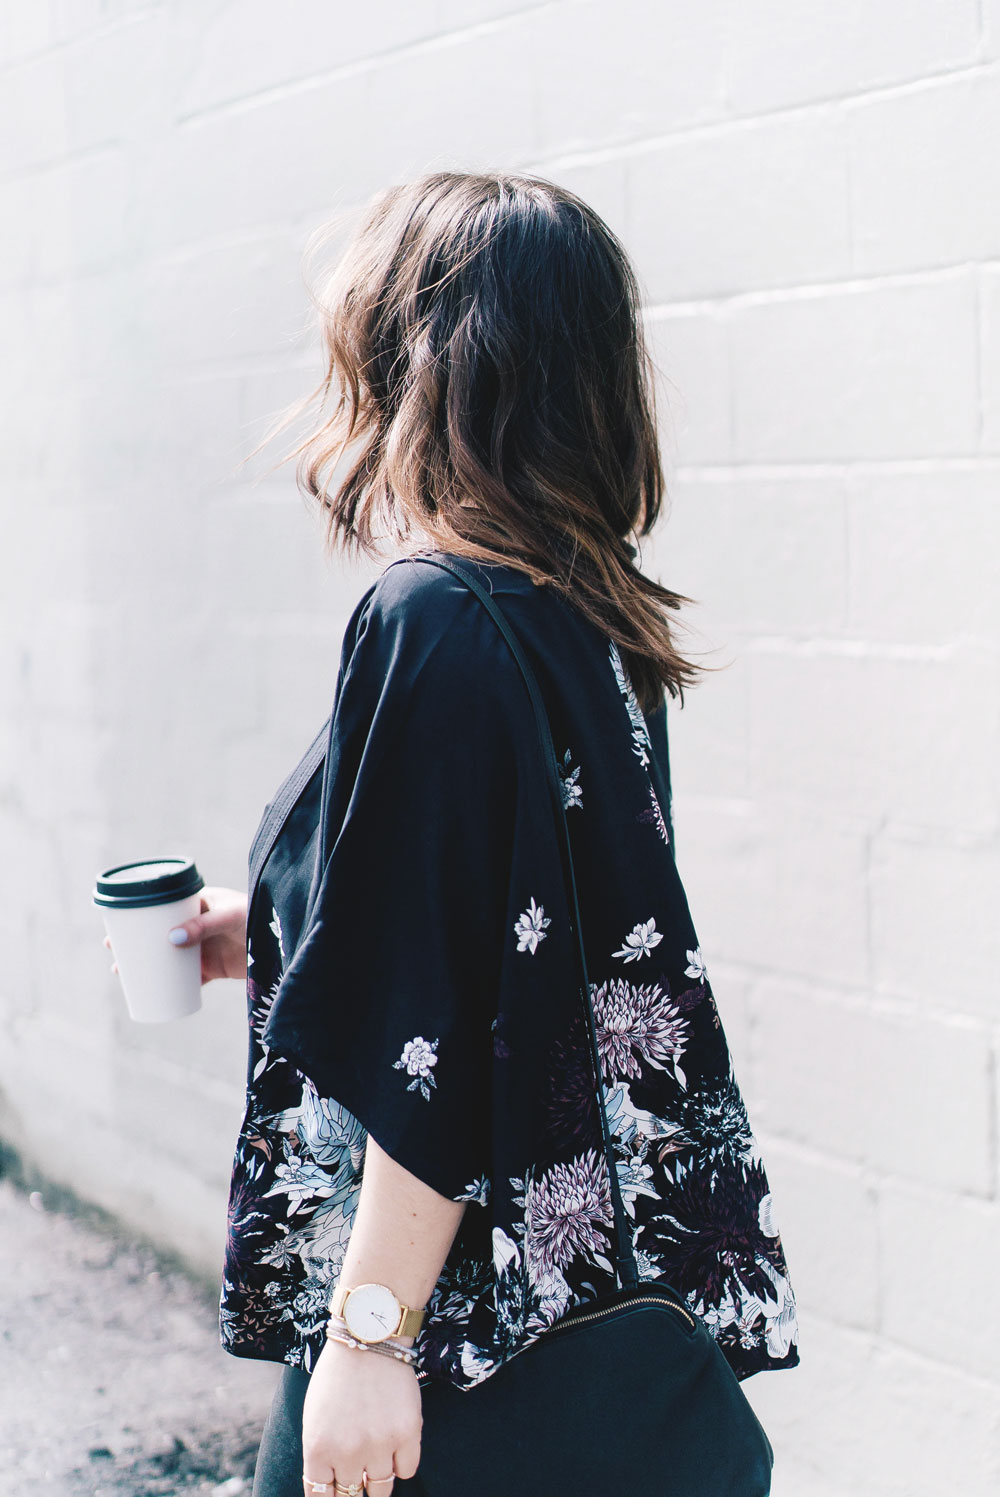 Spring floral trend styling tips in Aritzia Kimono, Celine Sunglasses, Aritzia Leather Leggings, how to wear spring florals, Aritzia spring tops, how to wear a kimono, Leah Alexandra jewelry by To Vogue or Bust 